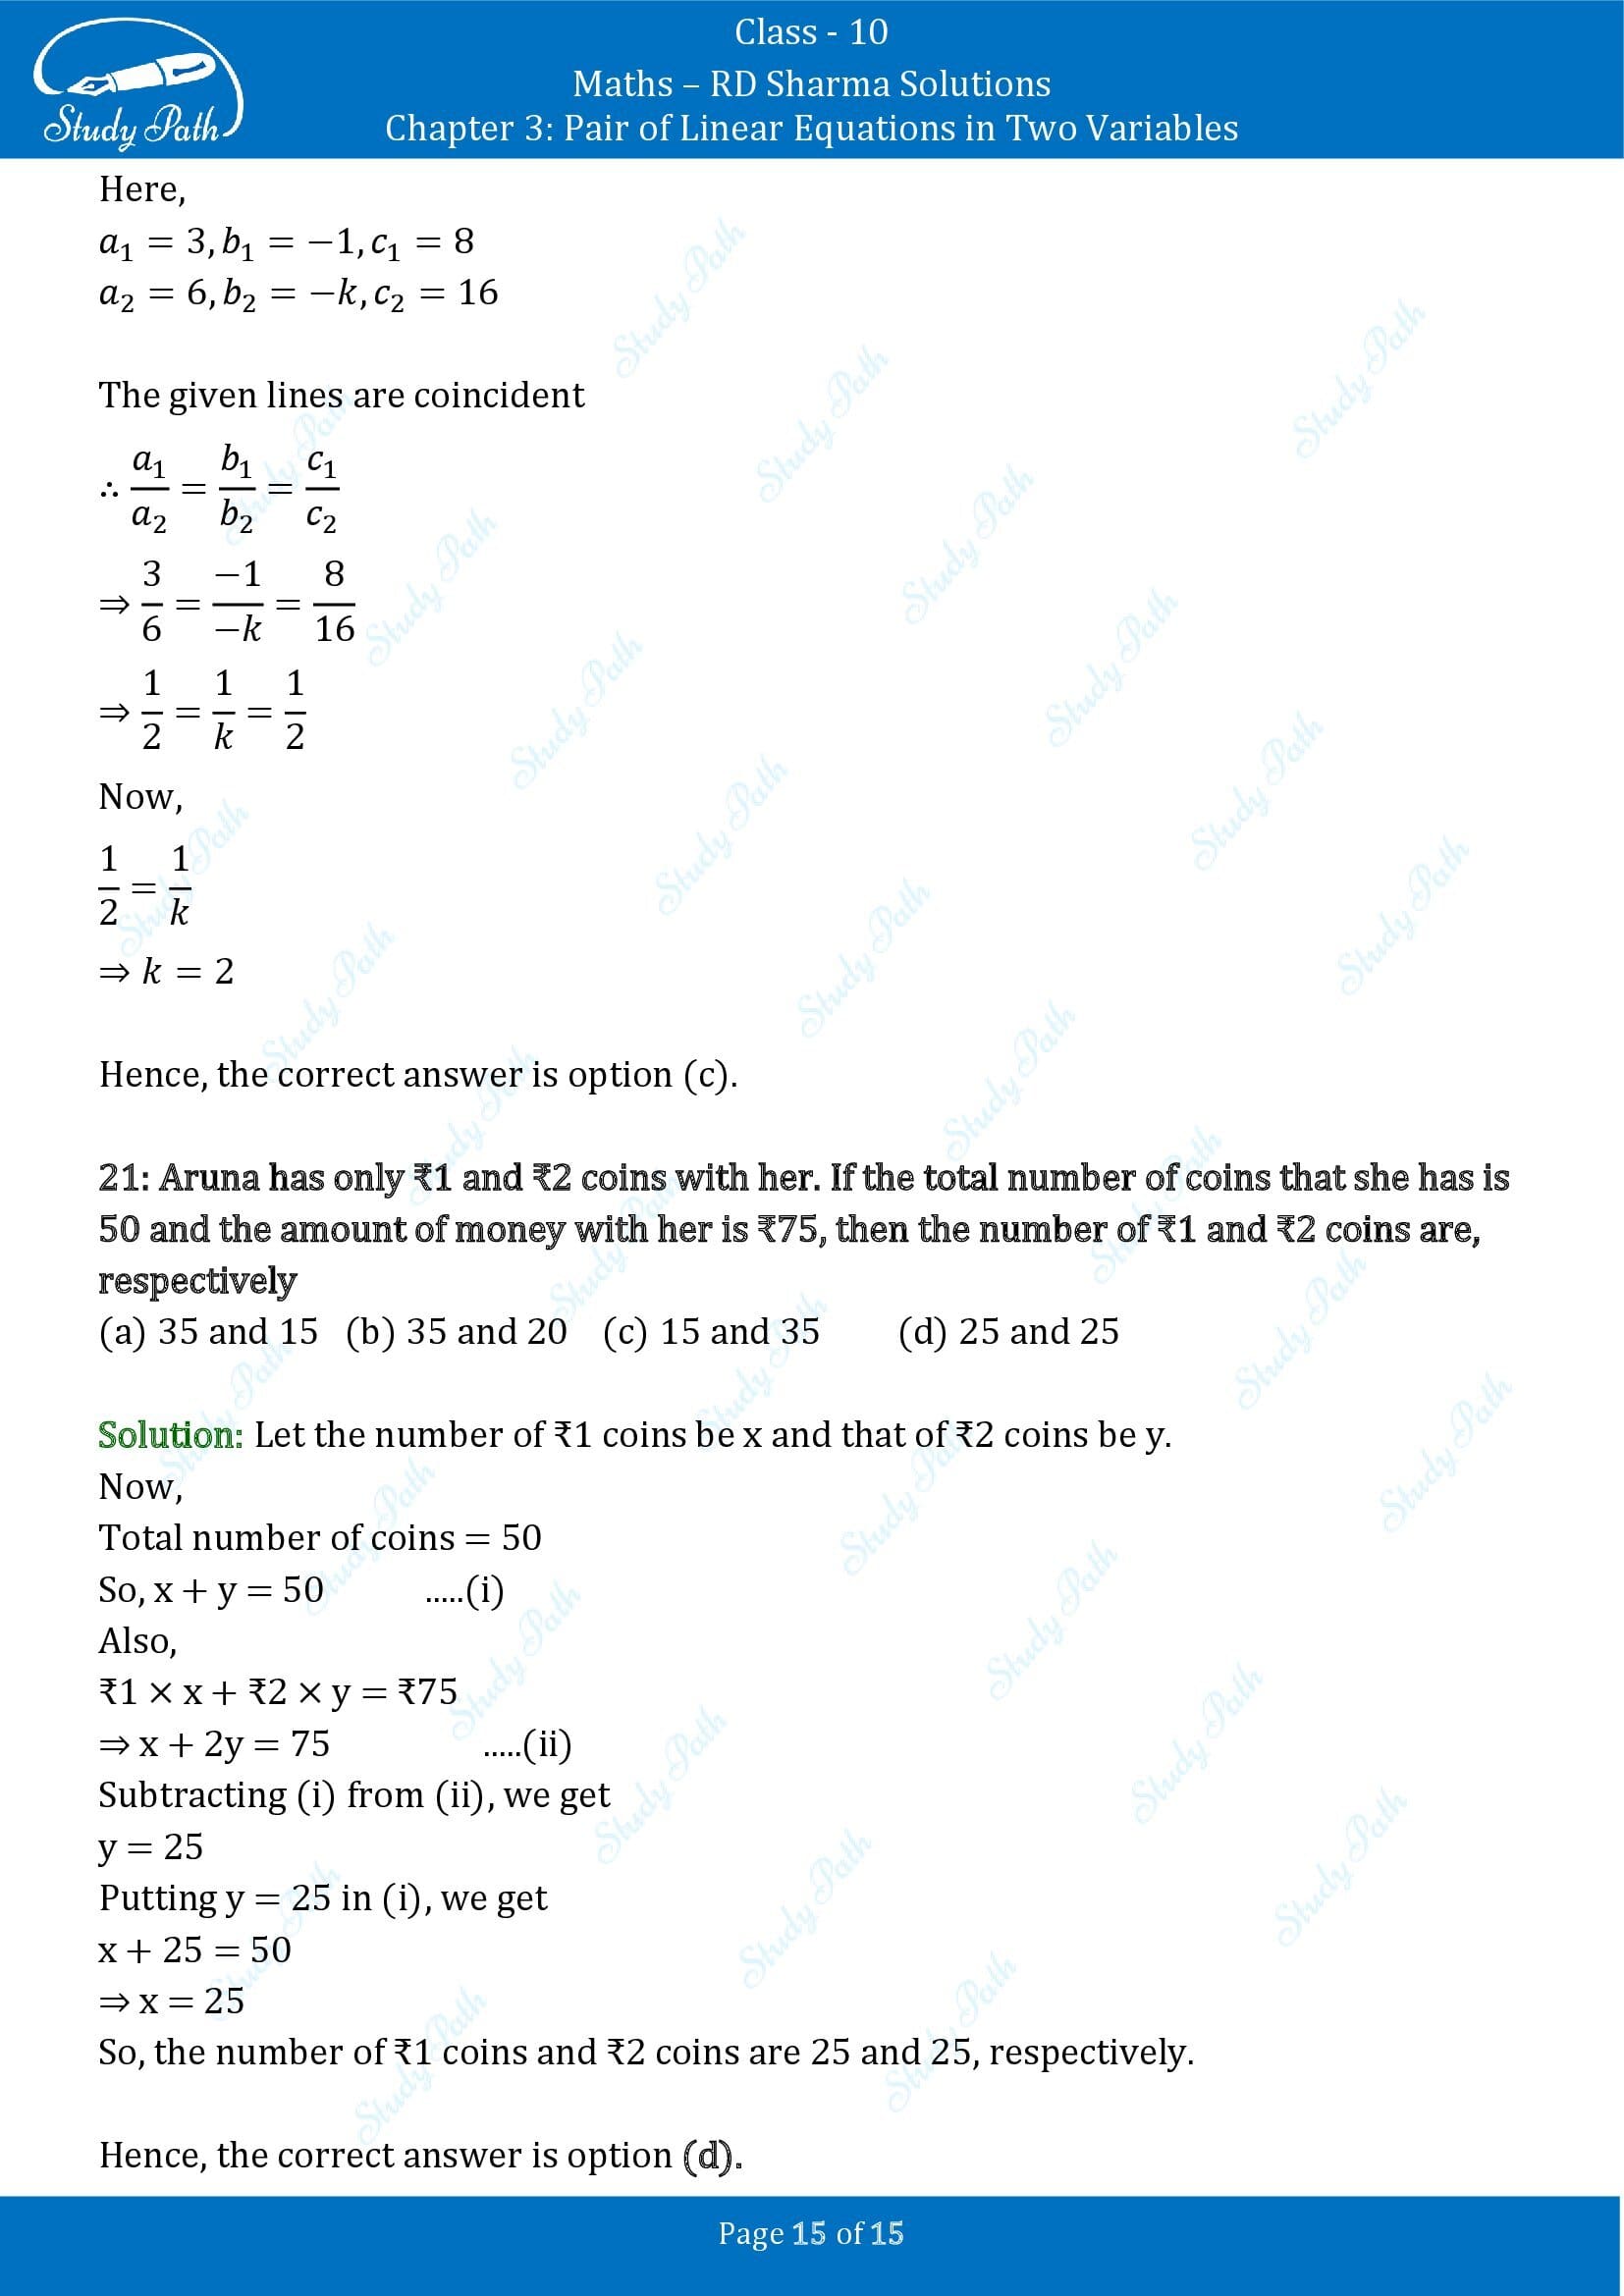 RD Sharma Solutions Class 10 Chapter 3 Pair of Linear Equations in Two Variables Multiple Choice Questions MCQs 00015